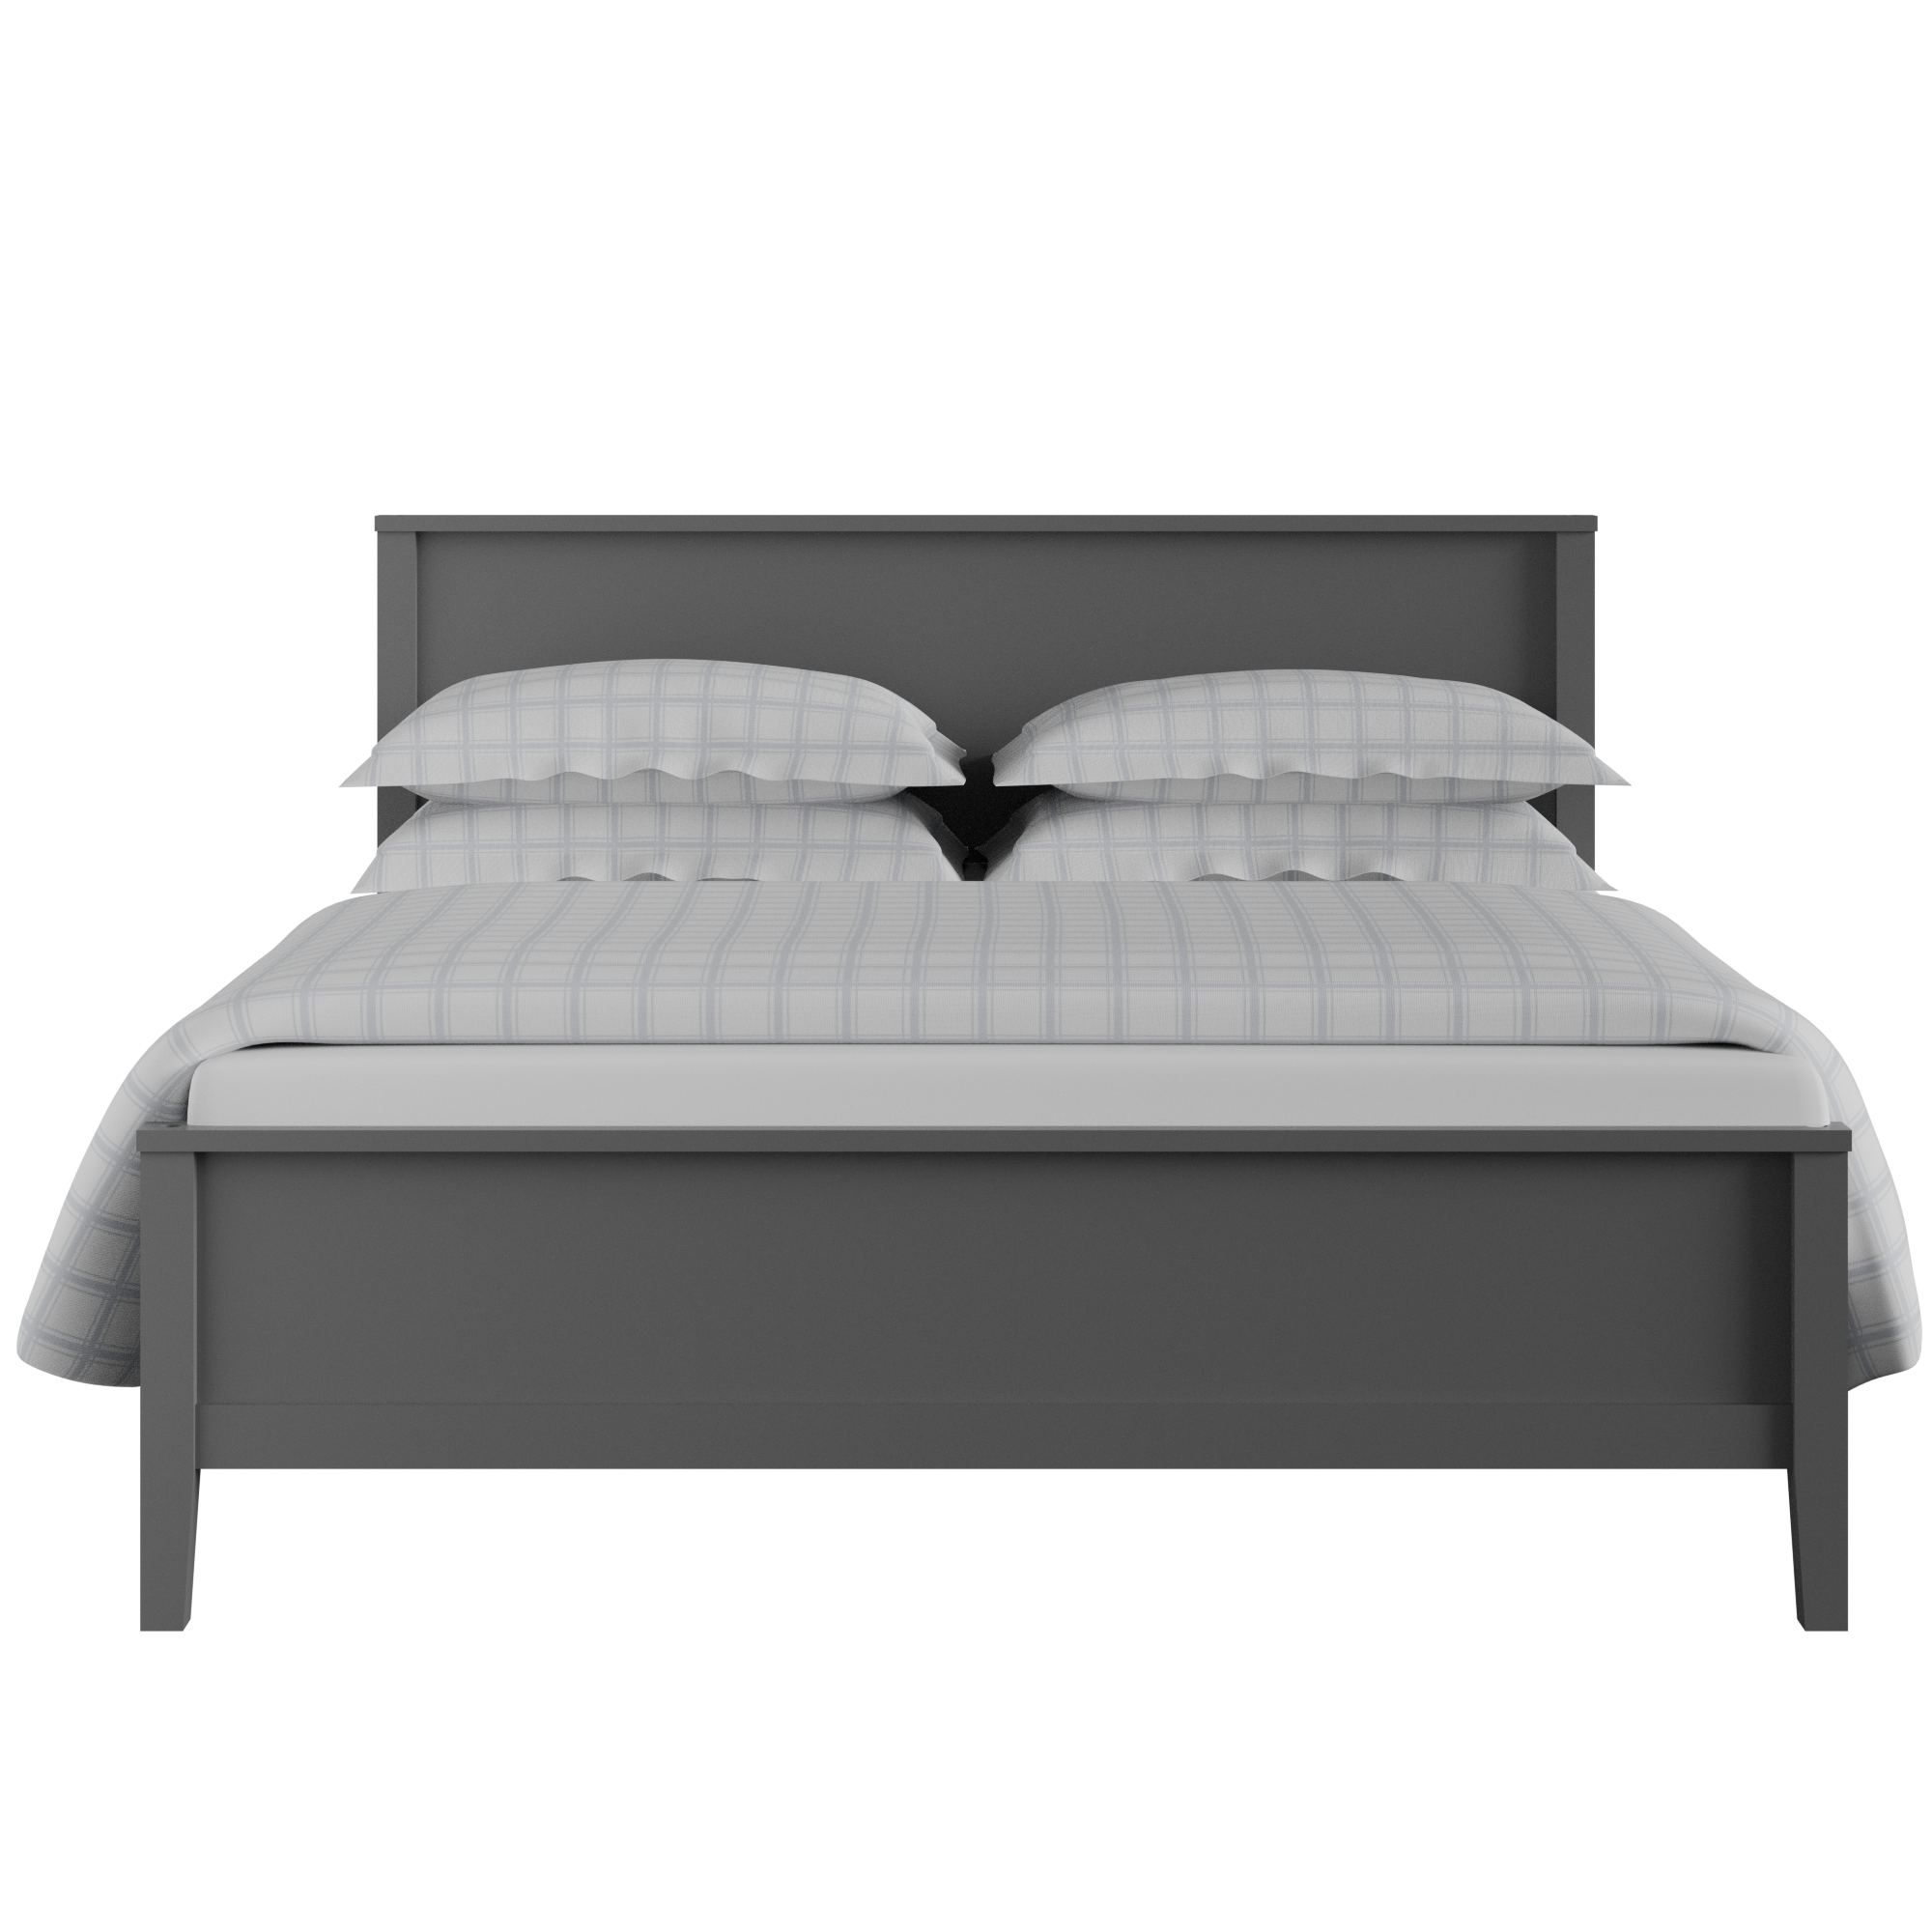 Ramsay Painted painted wood bed in grey with Juno mattress